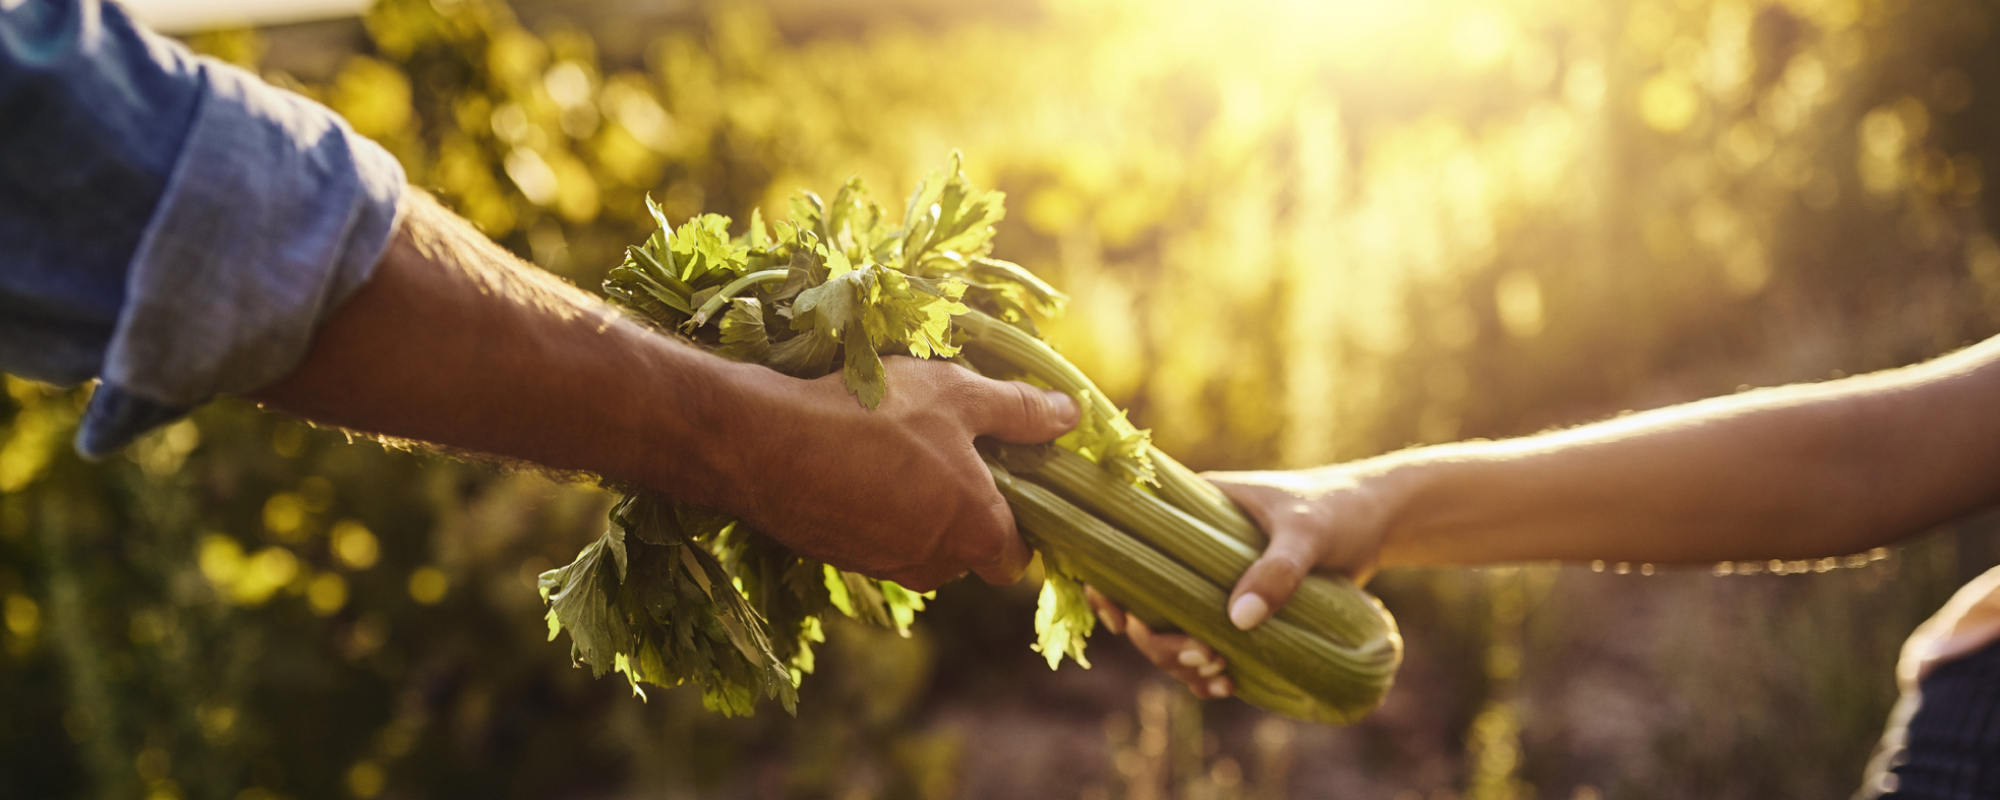 photo of a person handing celery to another person in a field